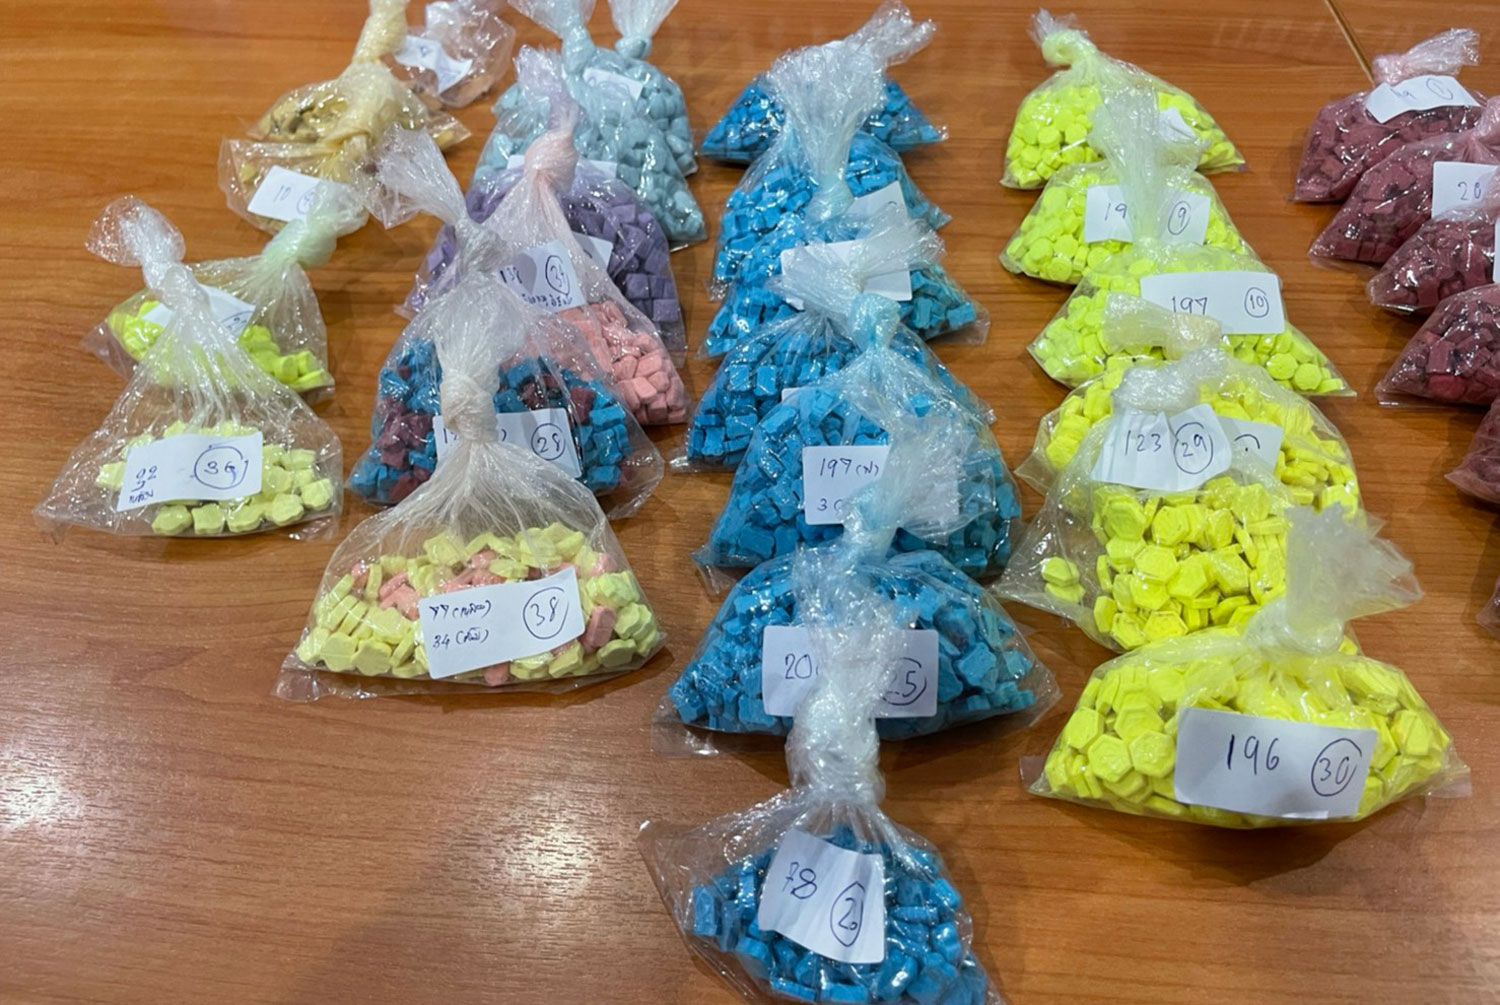 Ecstasy pills seized from the suspect’s room